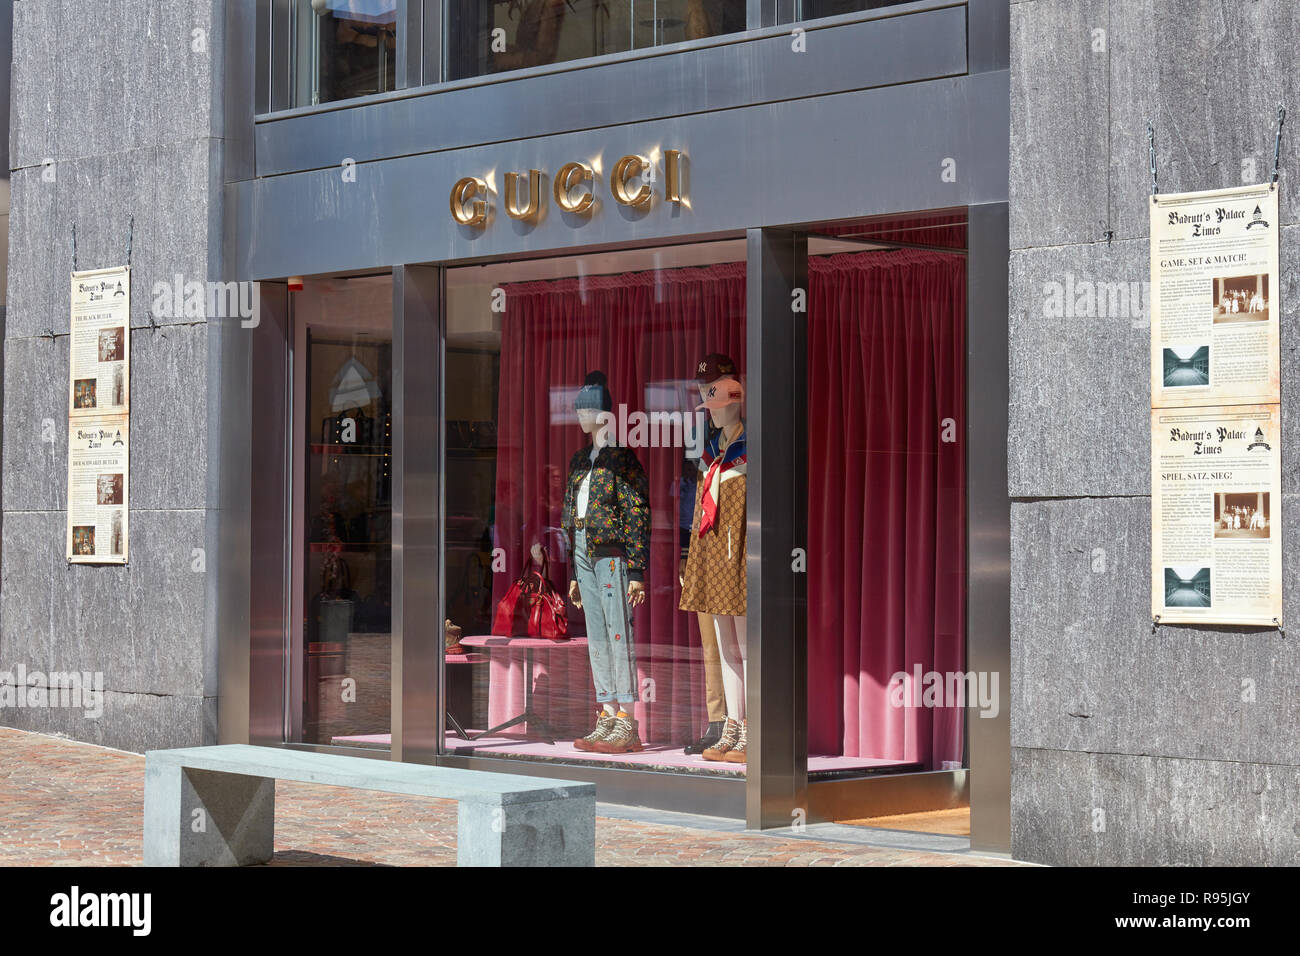 Gucci Shop Window High Resolution Stock Photography and Images - Alamy